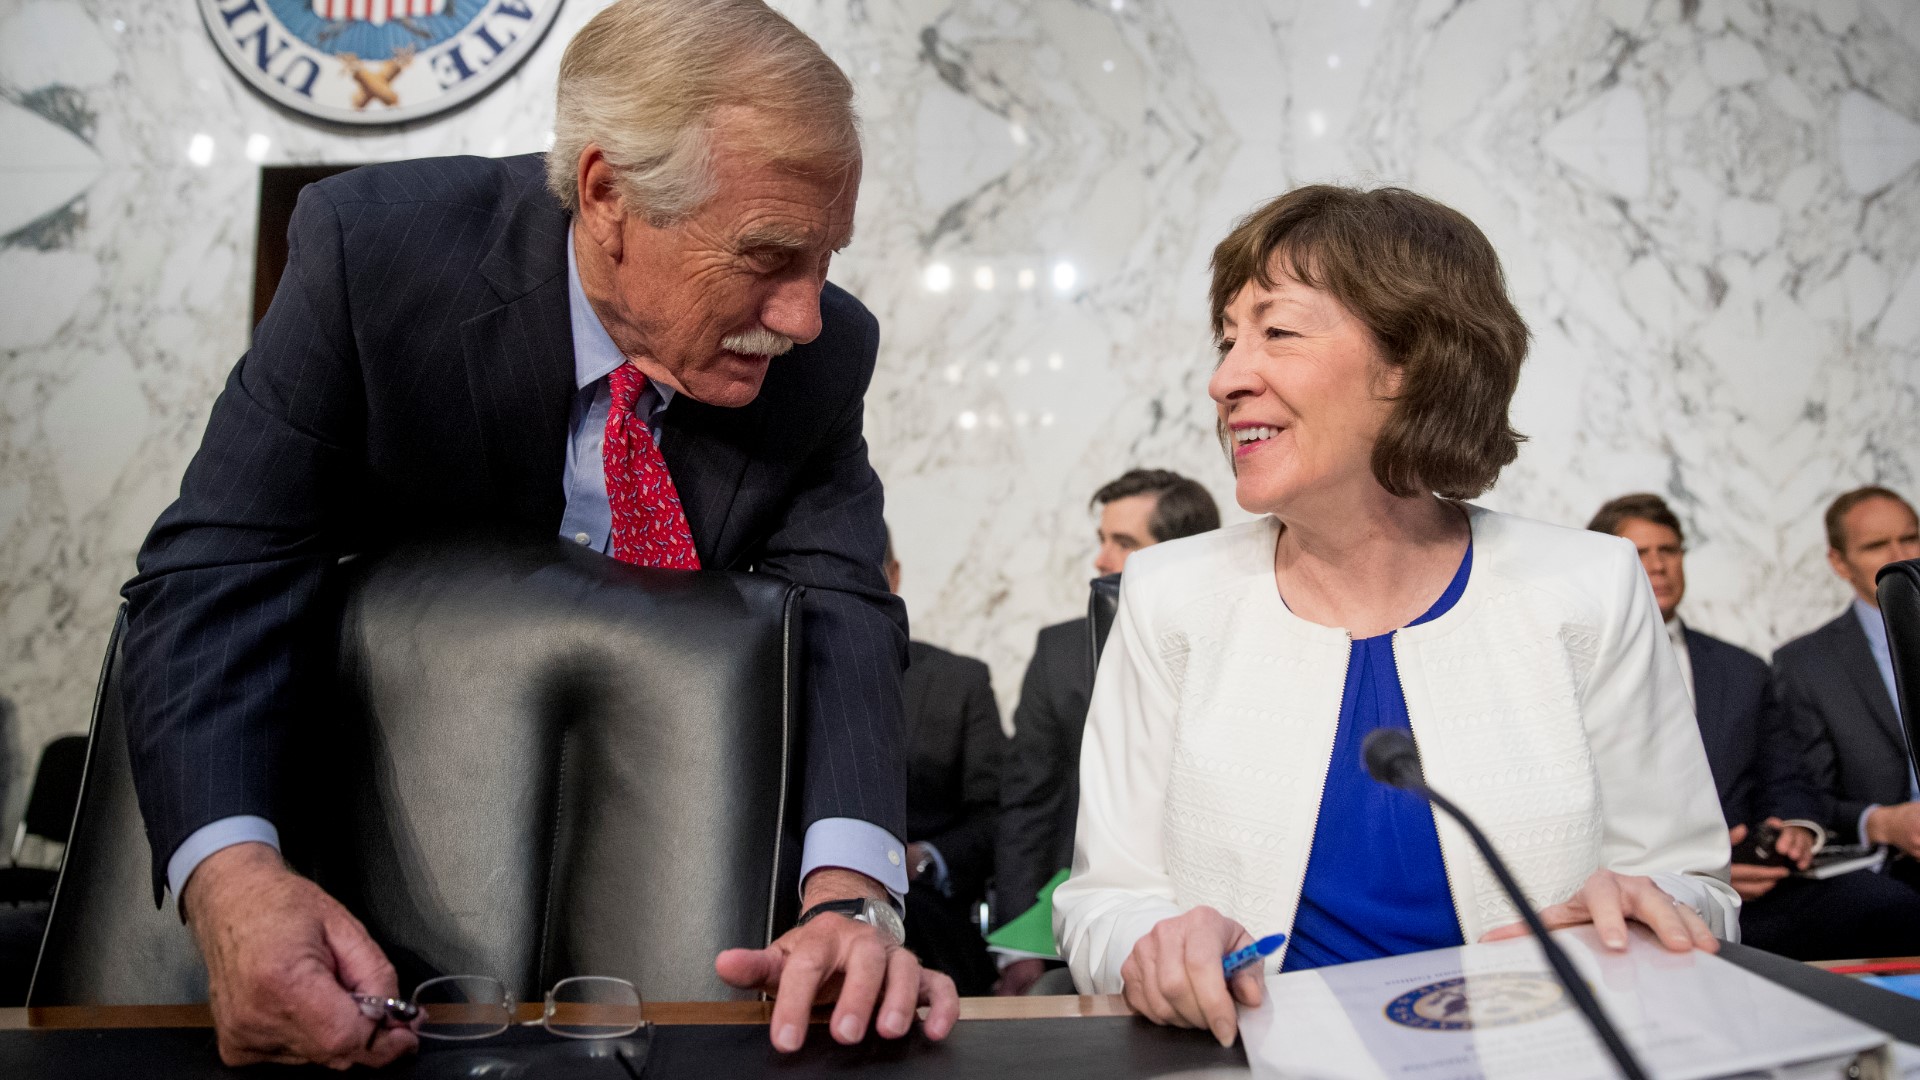 Sen. Susan Collins says she will vote to acquit Pres. Trump. Sen. Angus King says he will vote to convict.